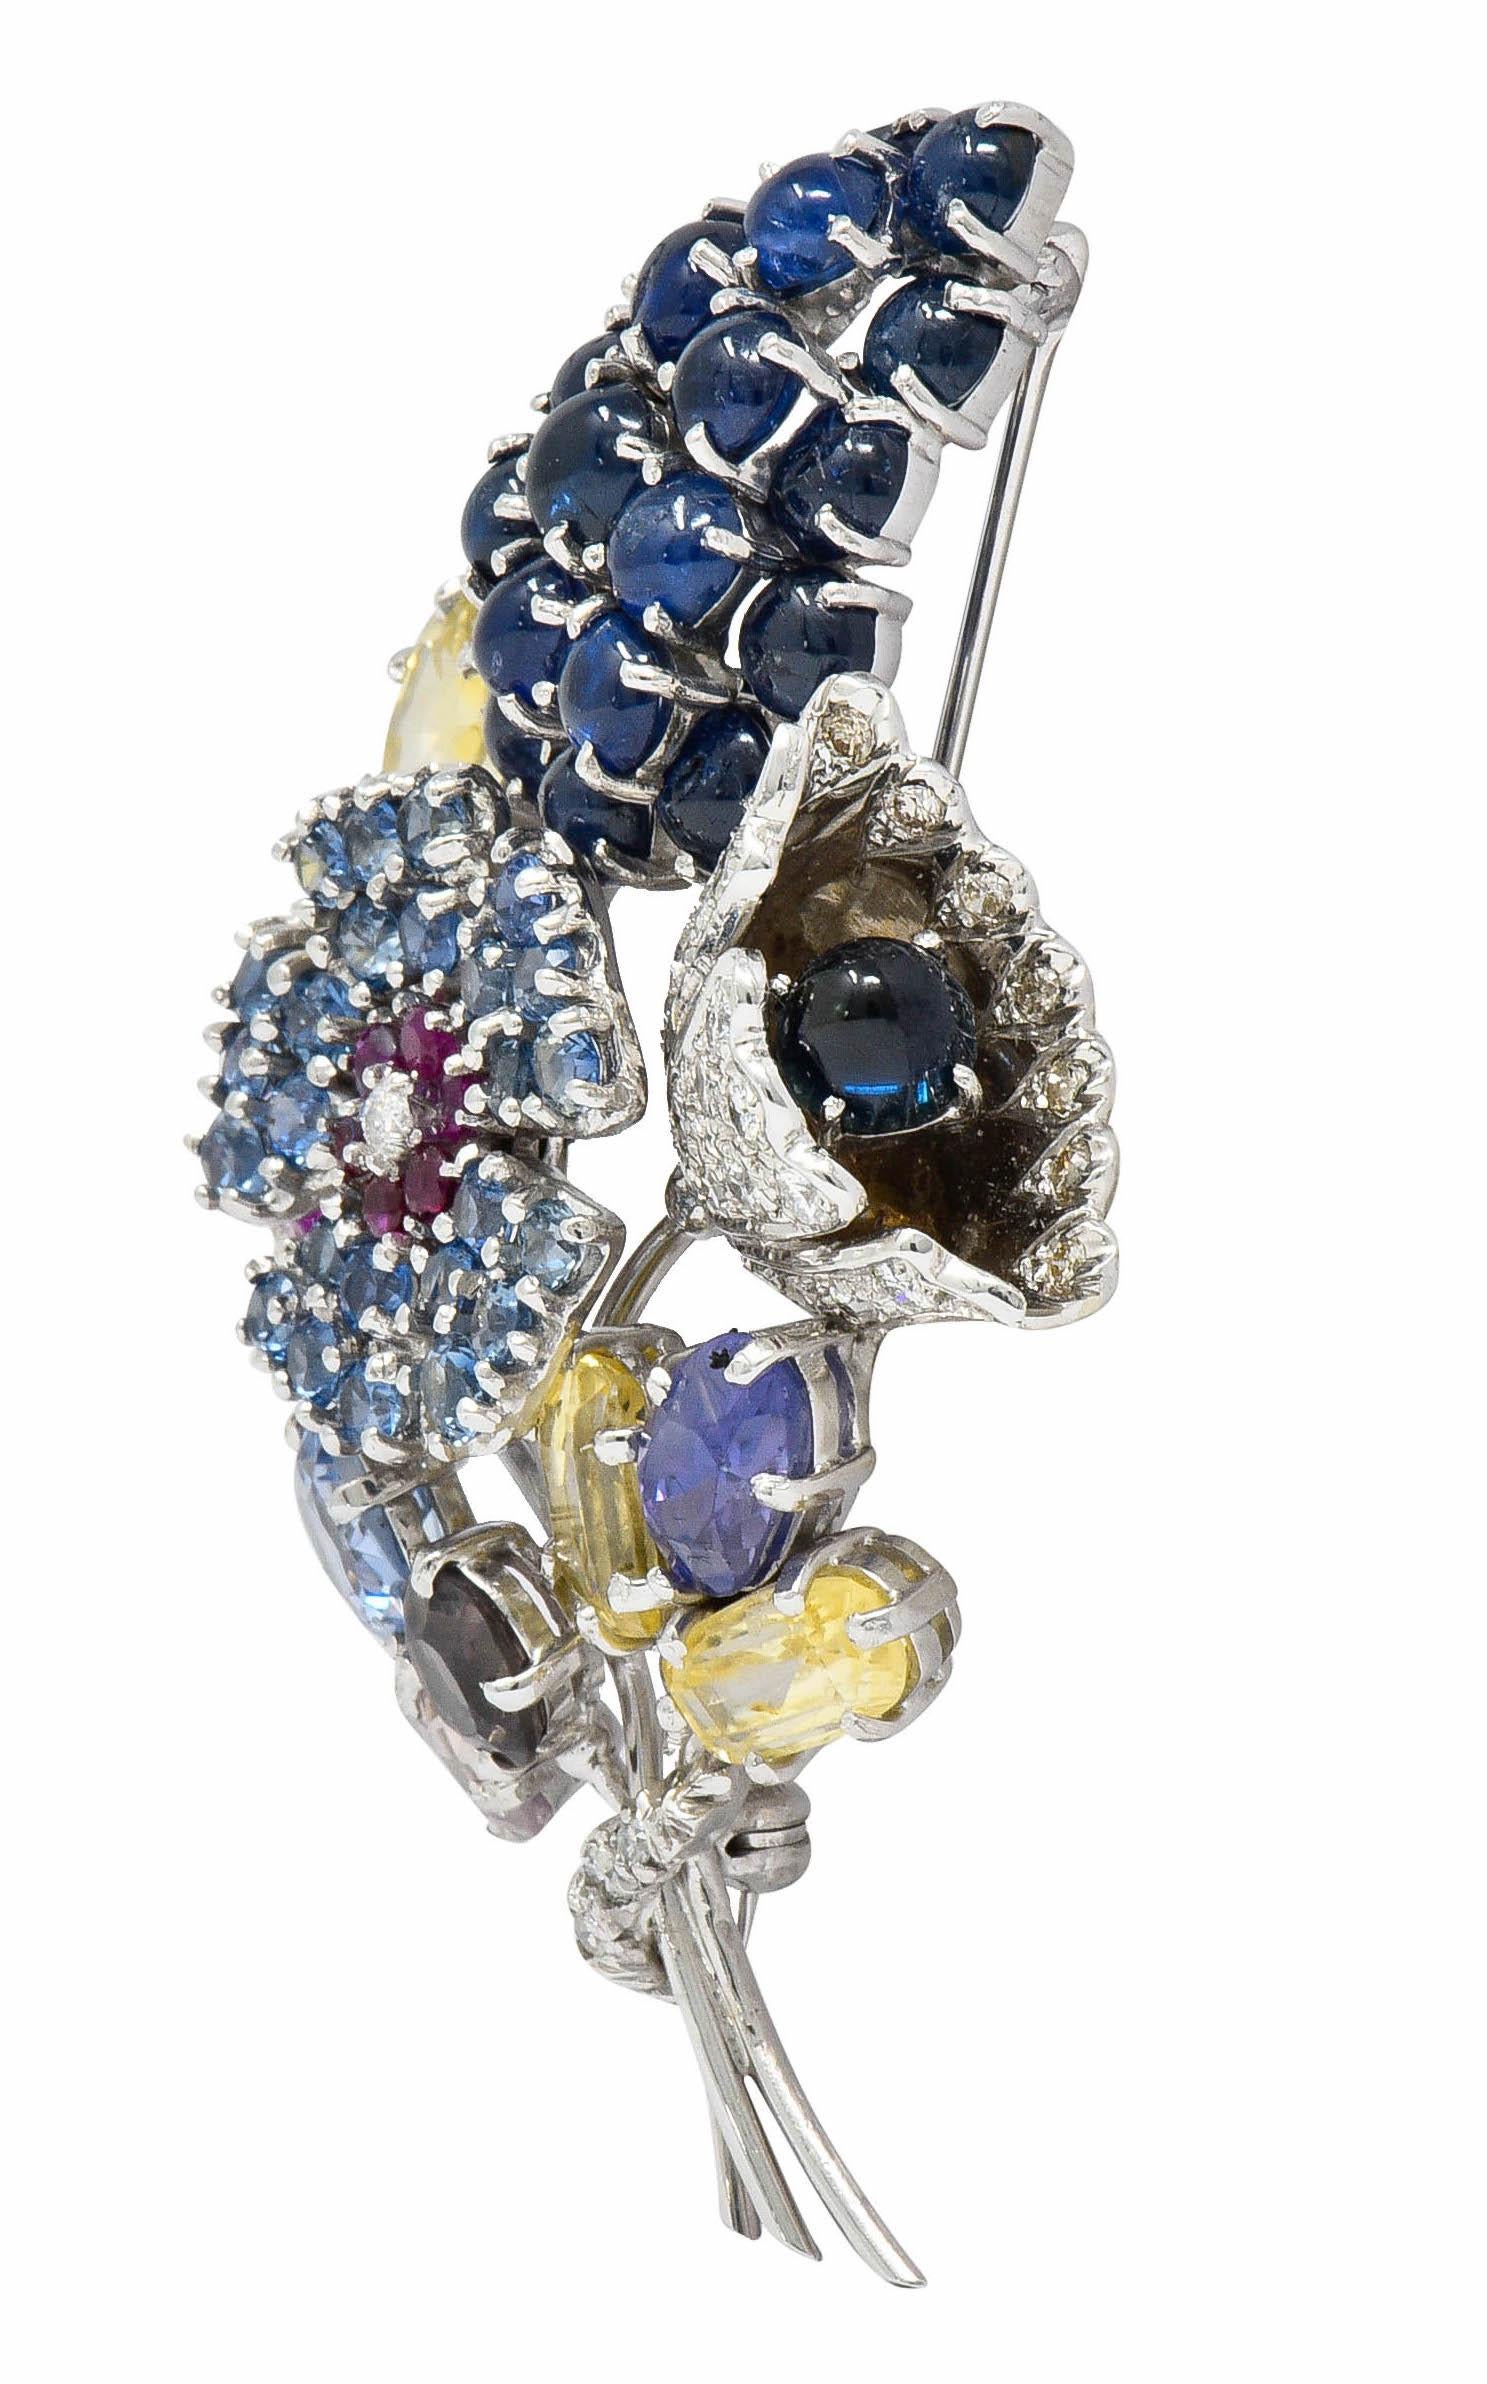 Brooch is designed as various florals comprised of diverse hues of sapphires

Featuring round cut cabochon, cushion, round, and hexagonal cuts that weigh in total approximately 25.00 carats

Pavè set and accented by single and round brilliant cut